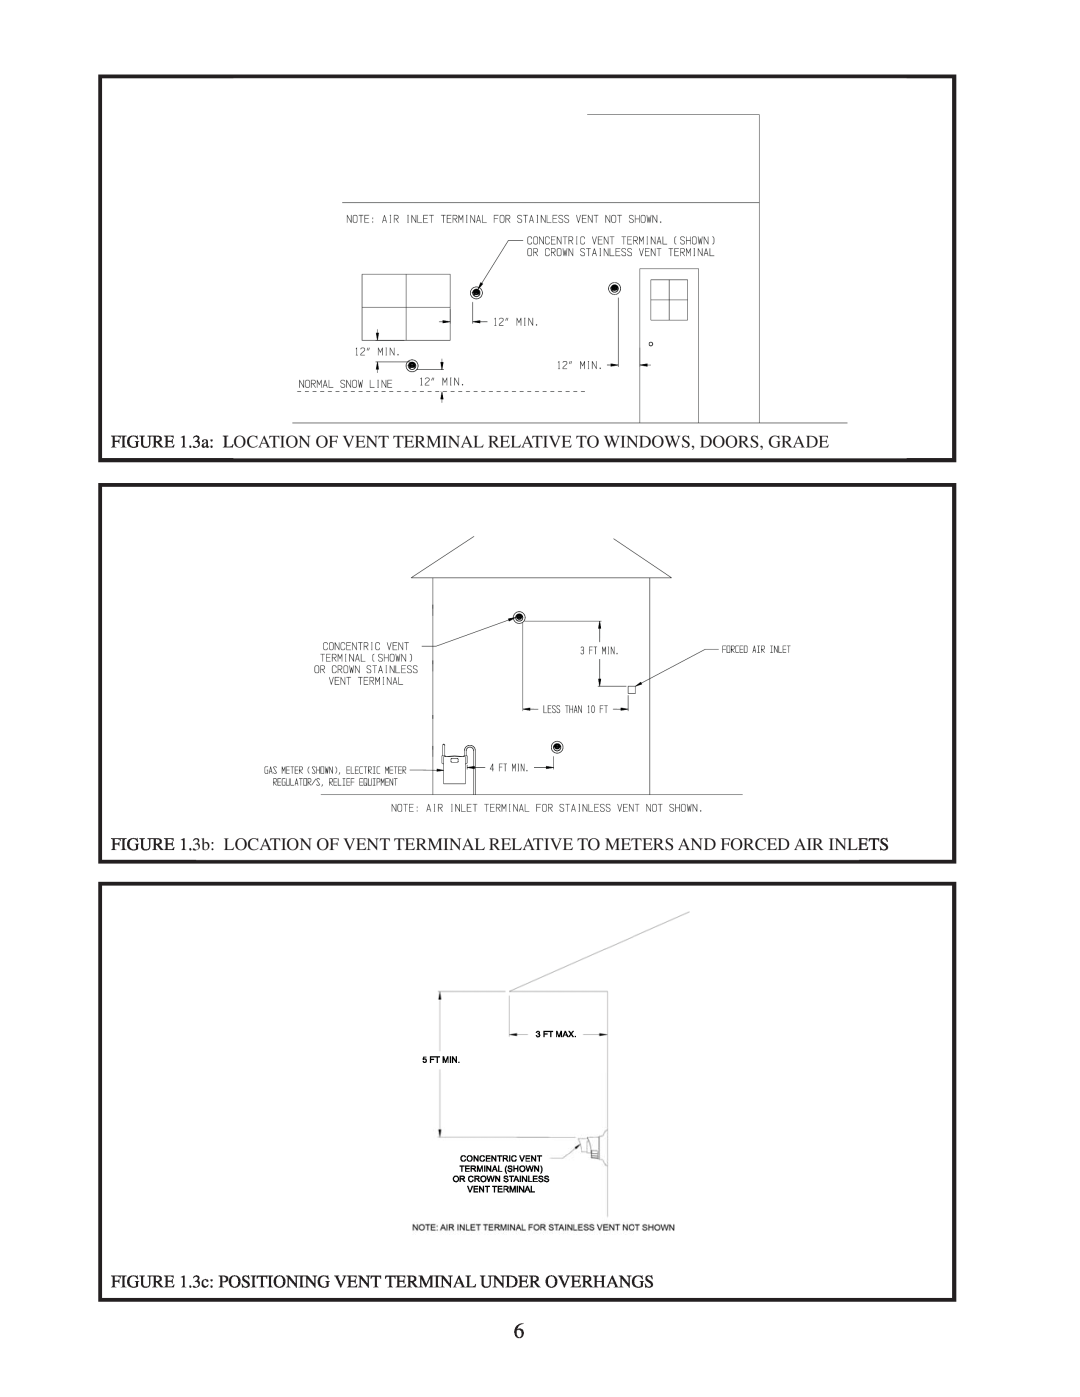 Crown Boiler M600 installation instructions 3c POSITIONING VENT TERMINAL UNDER OVERHANGS 